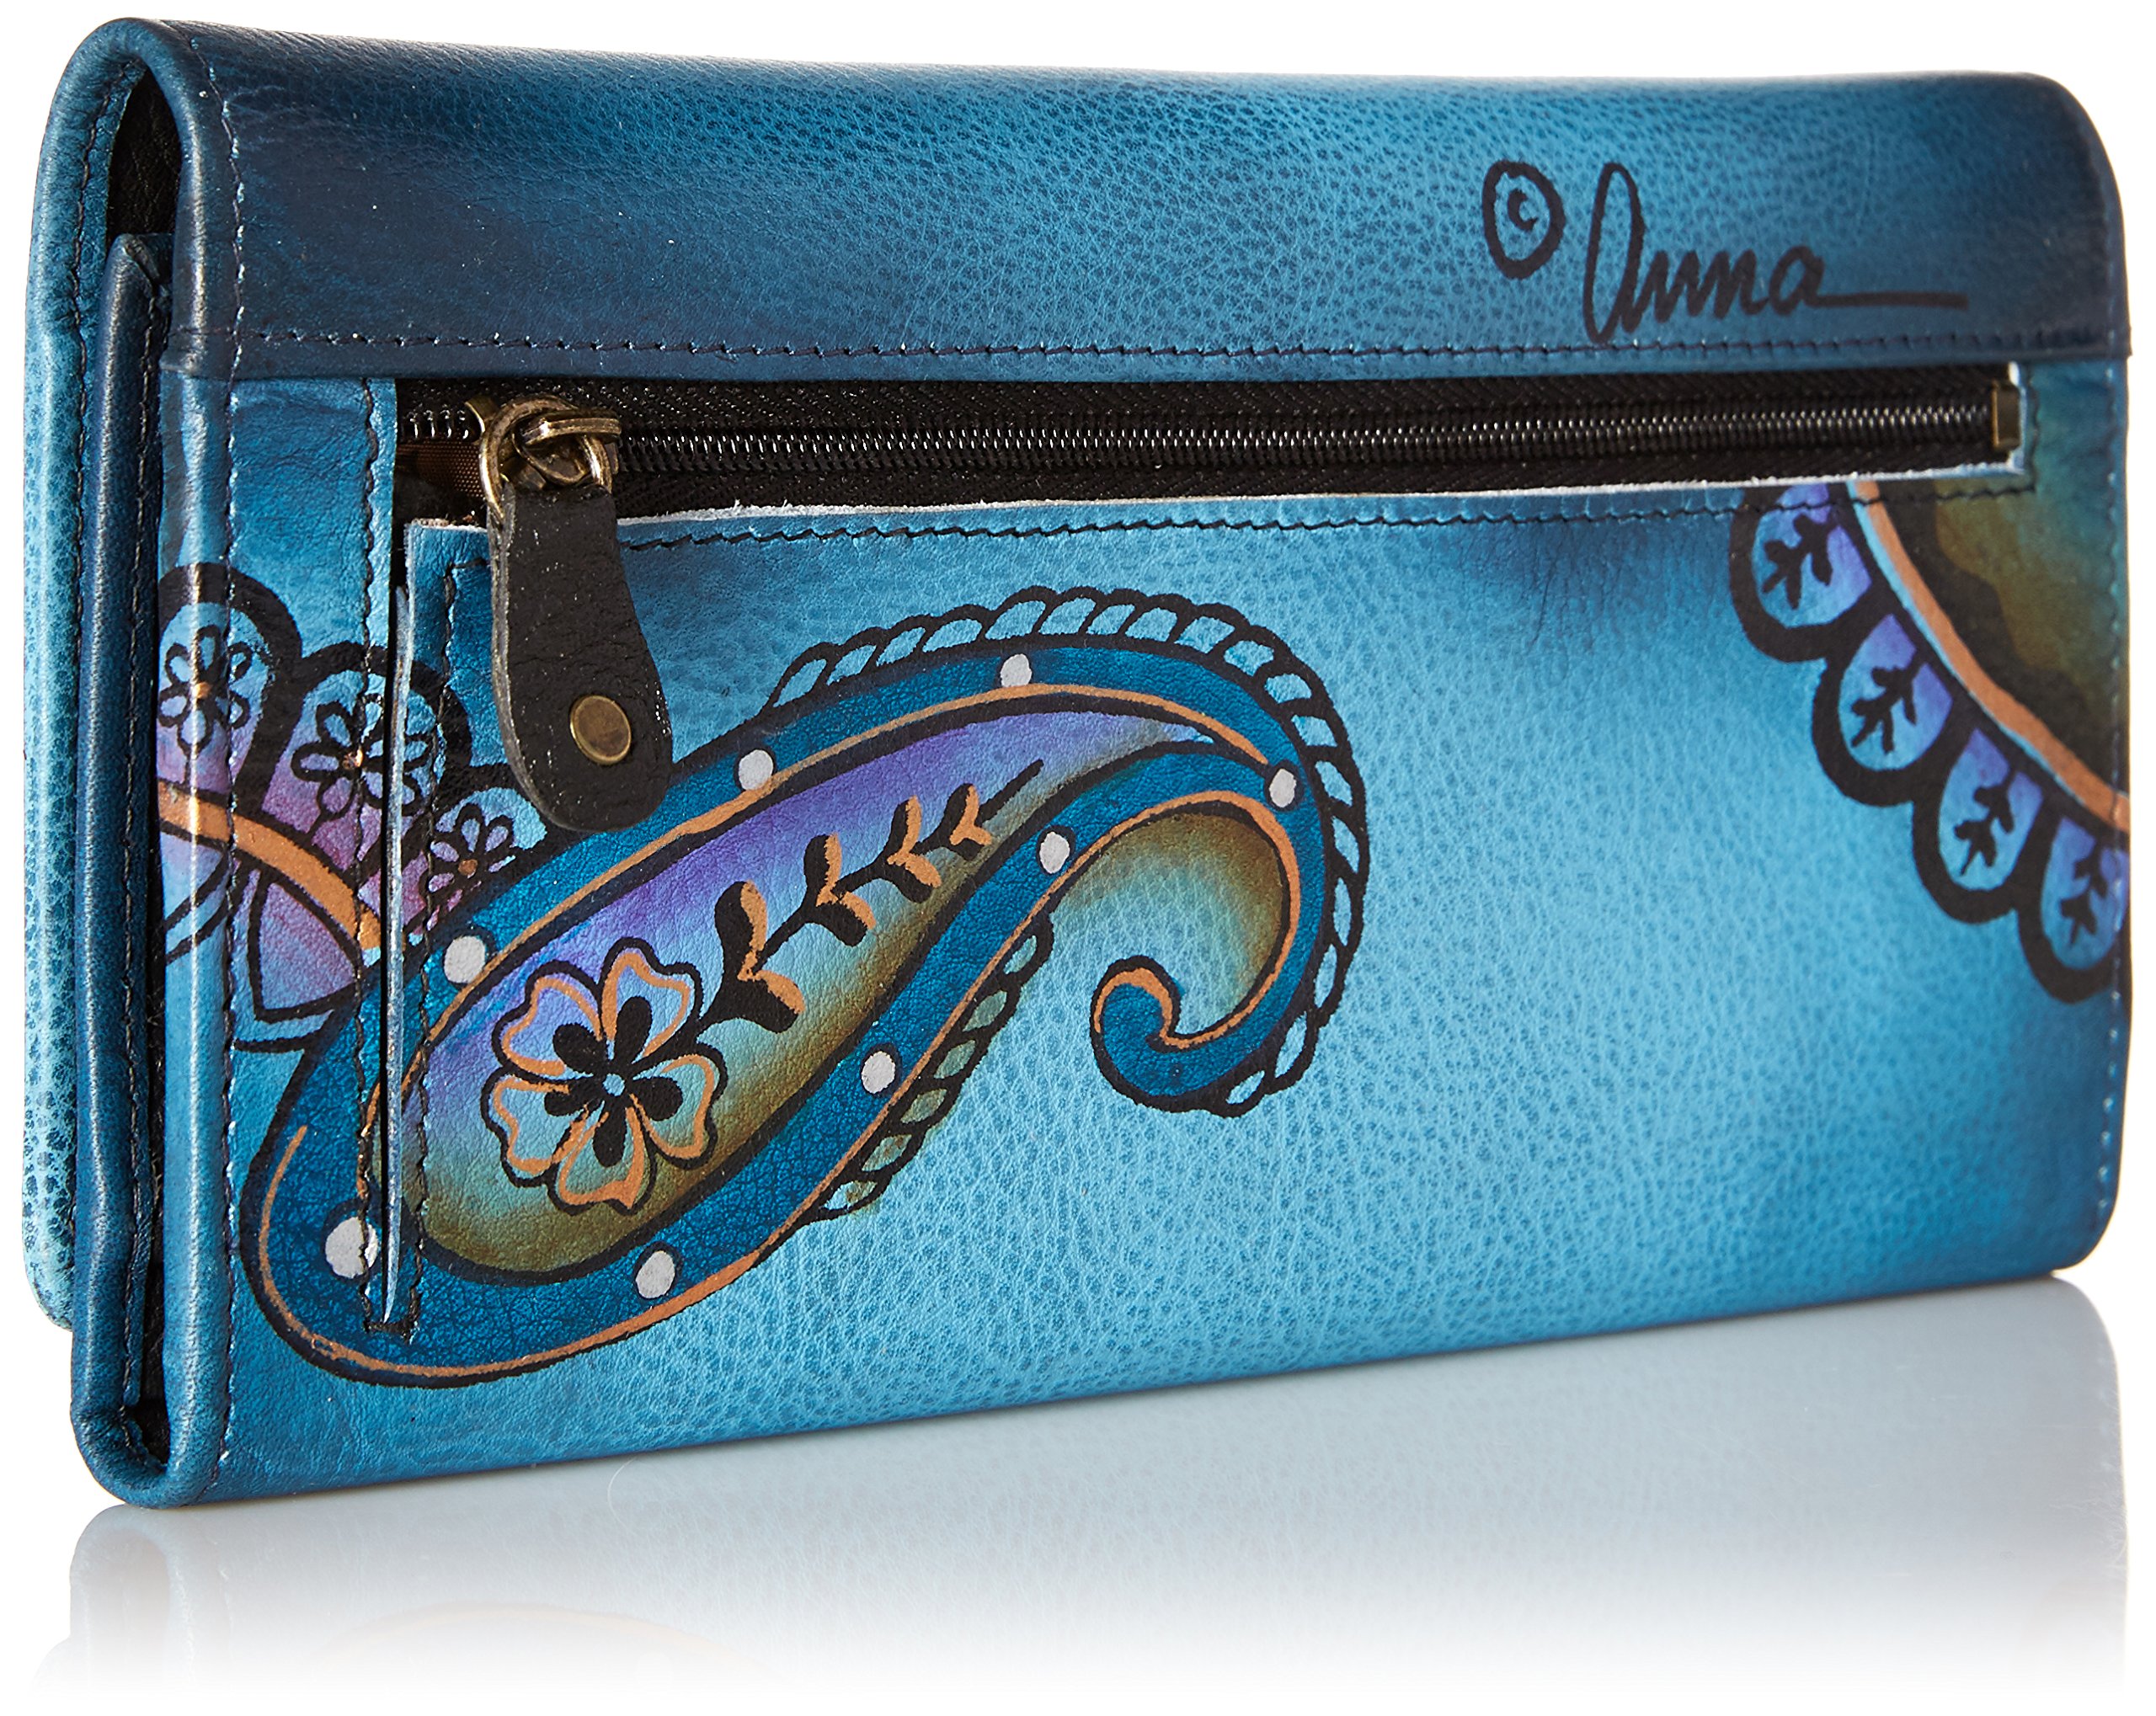 Anna by Anuschka Women's Hand Painted Genuine Leather Multi Pocket Wallet